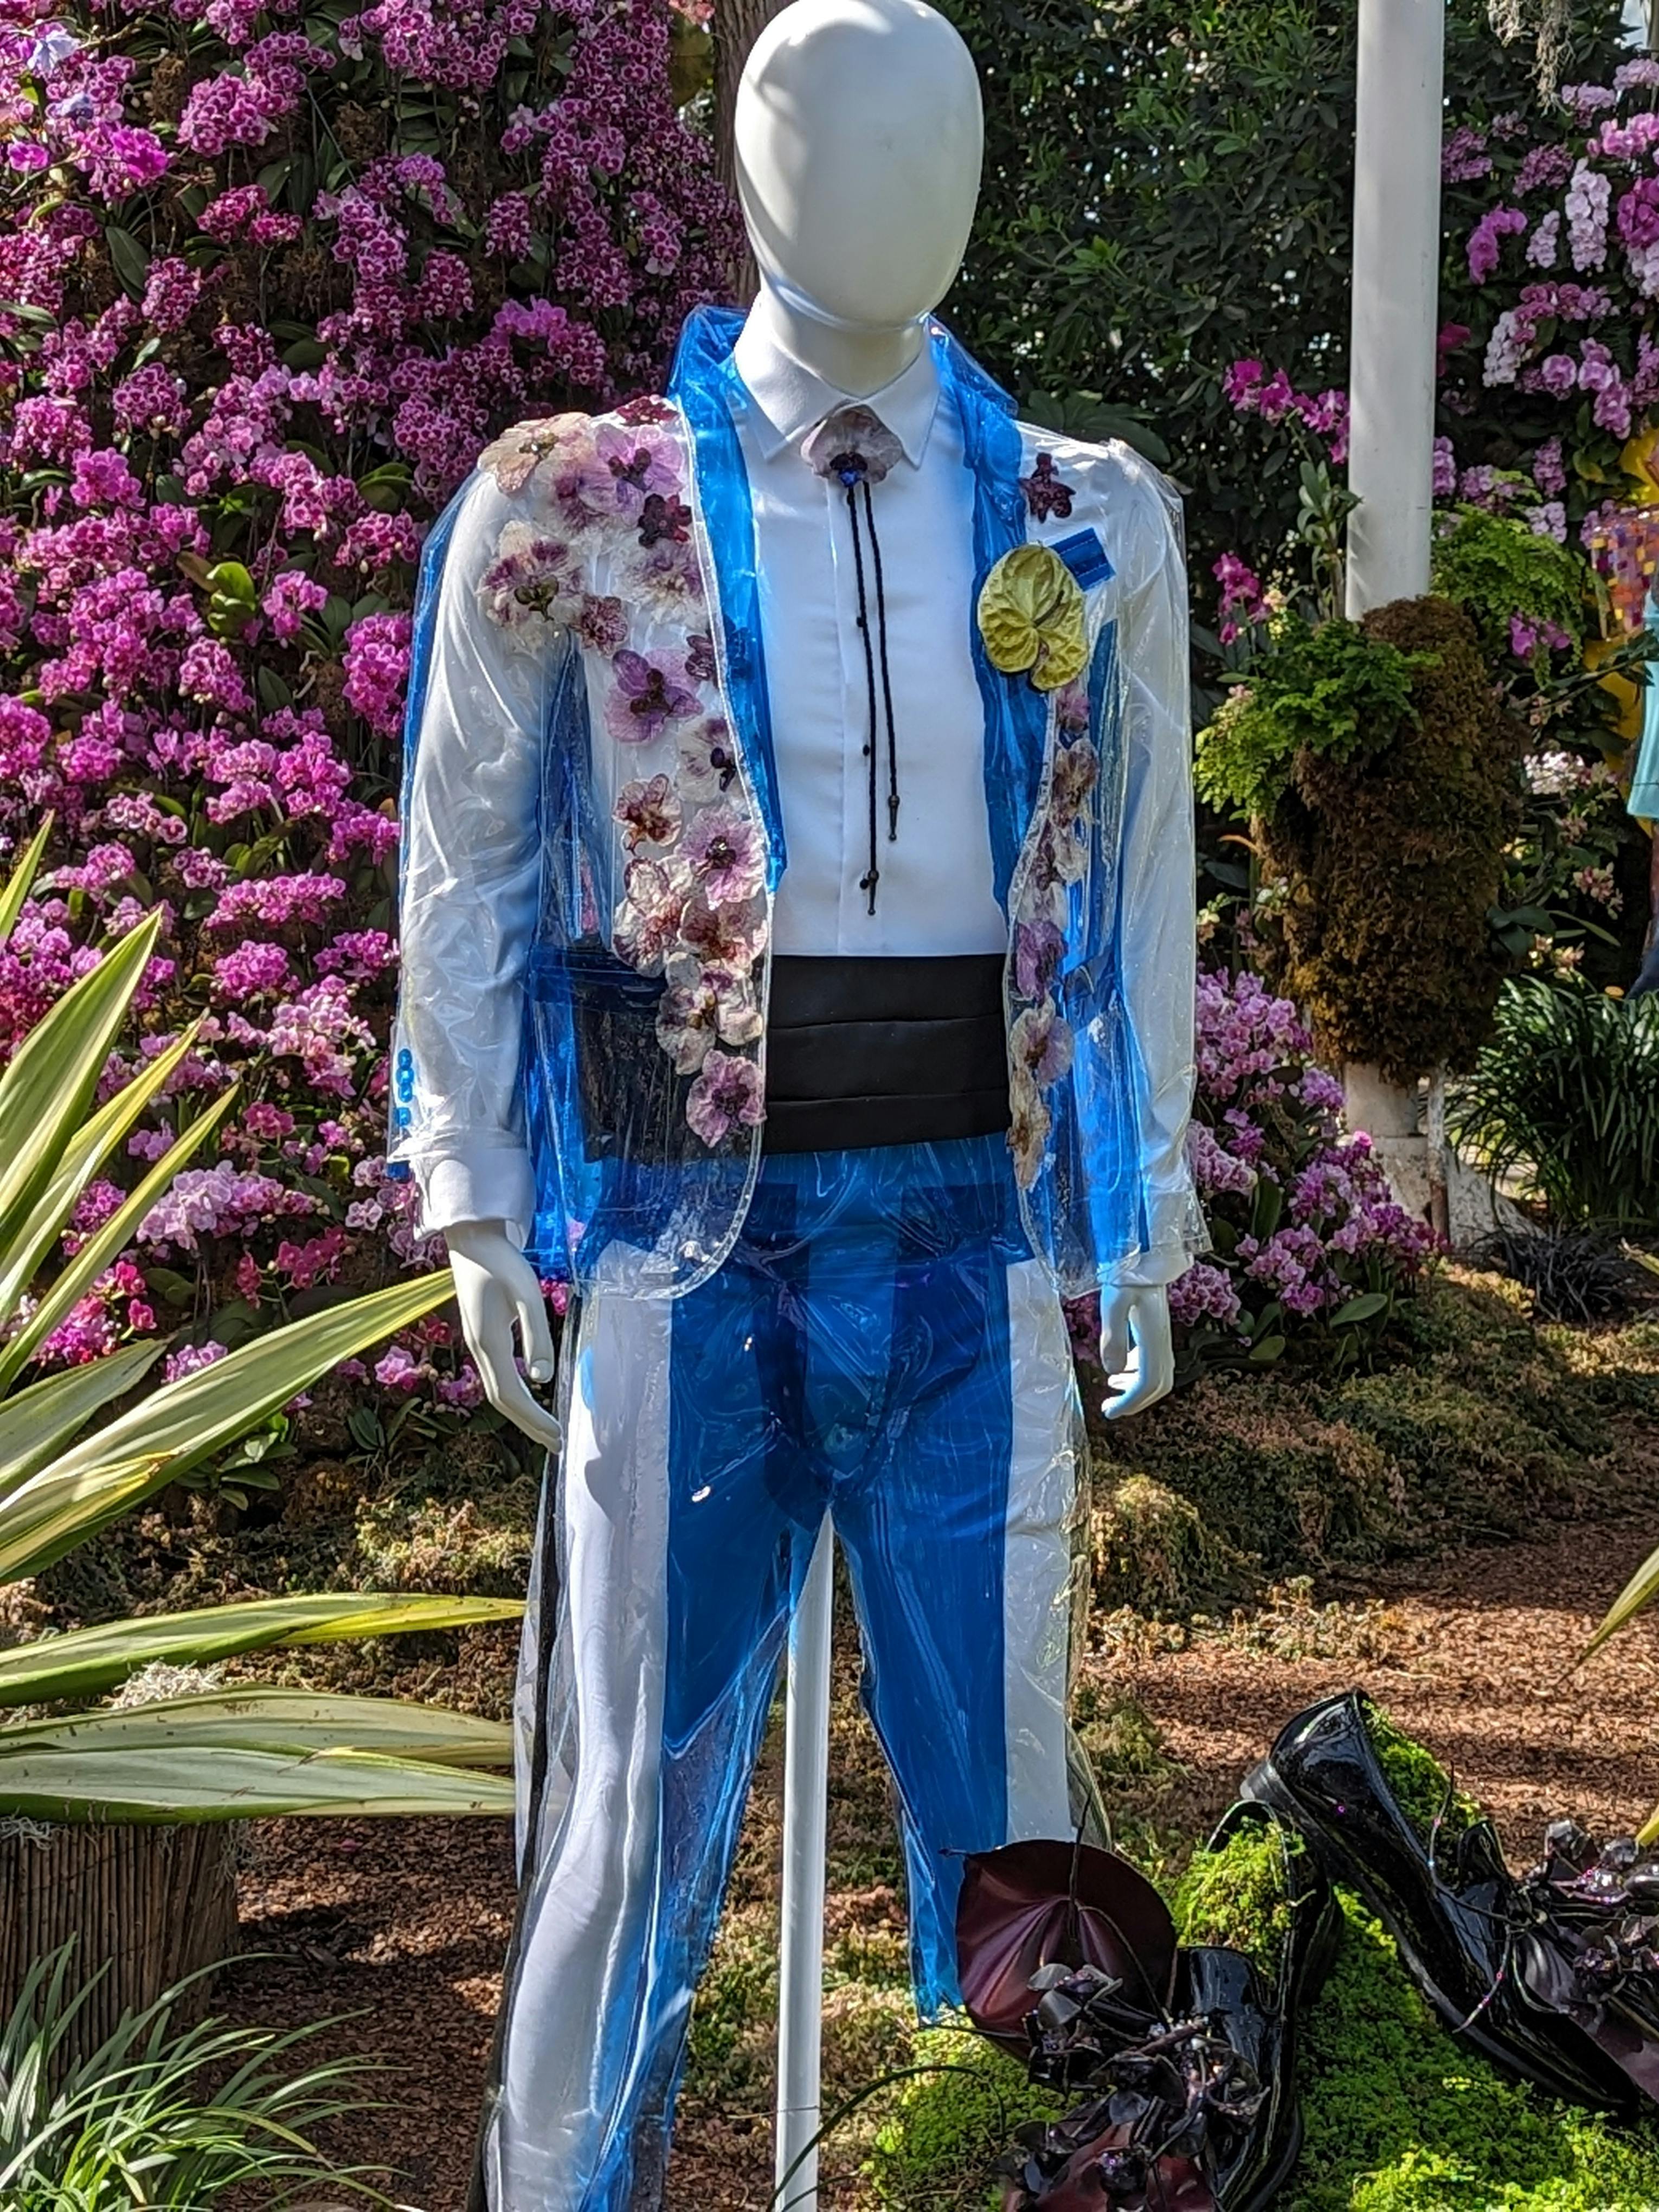 mannequin wearing plastic suite adorned with flowers